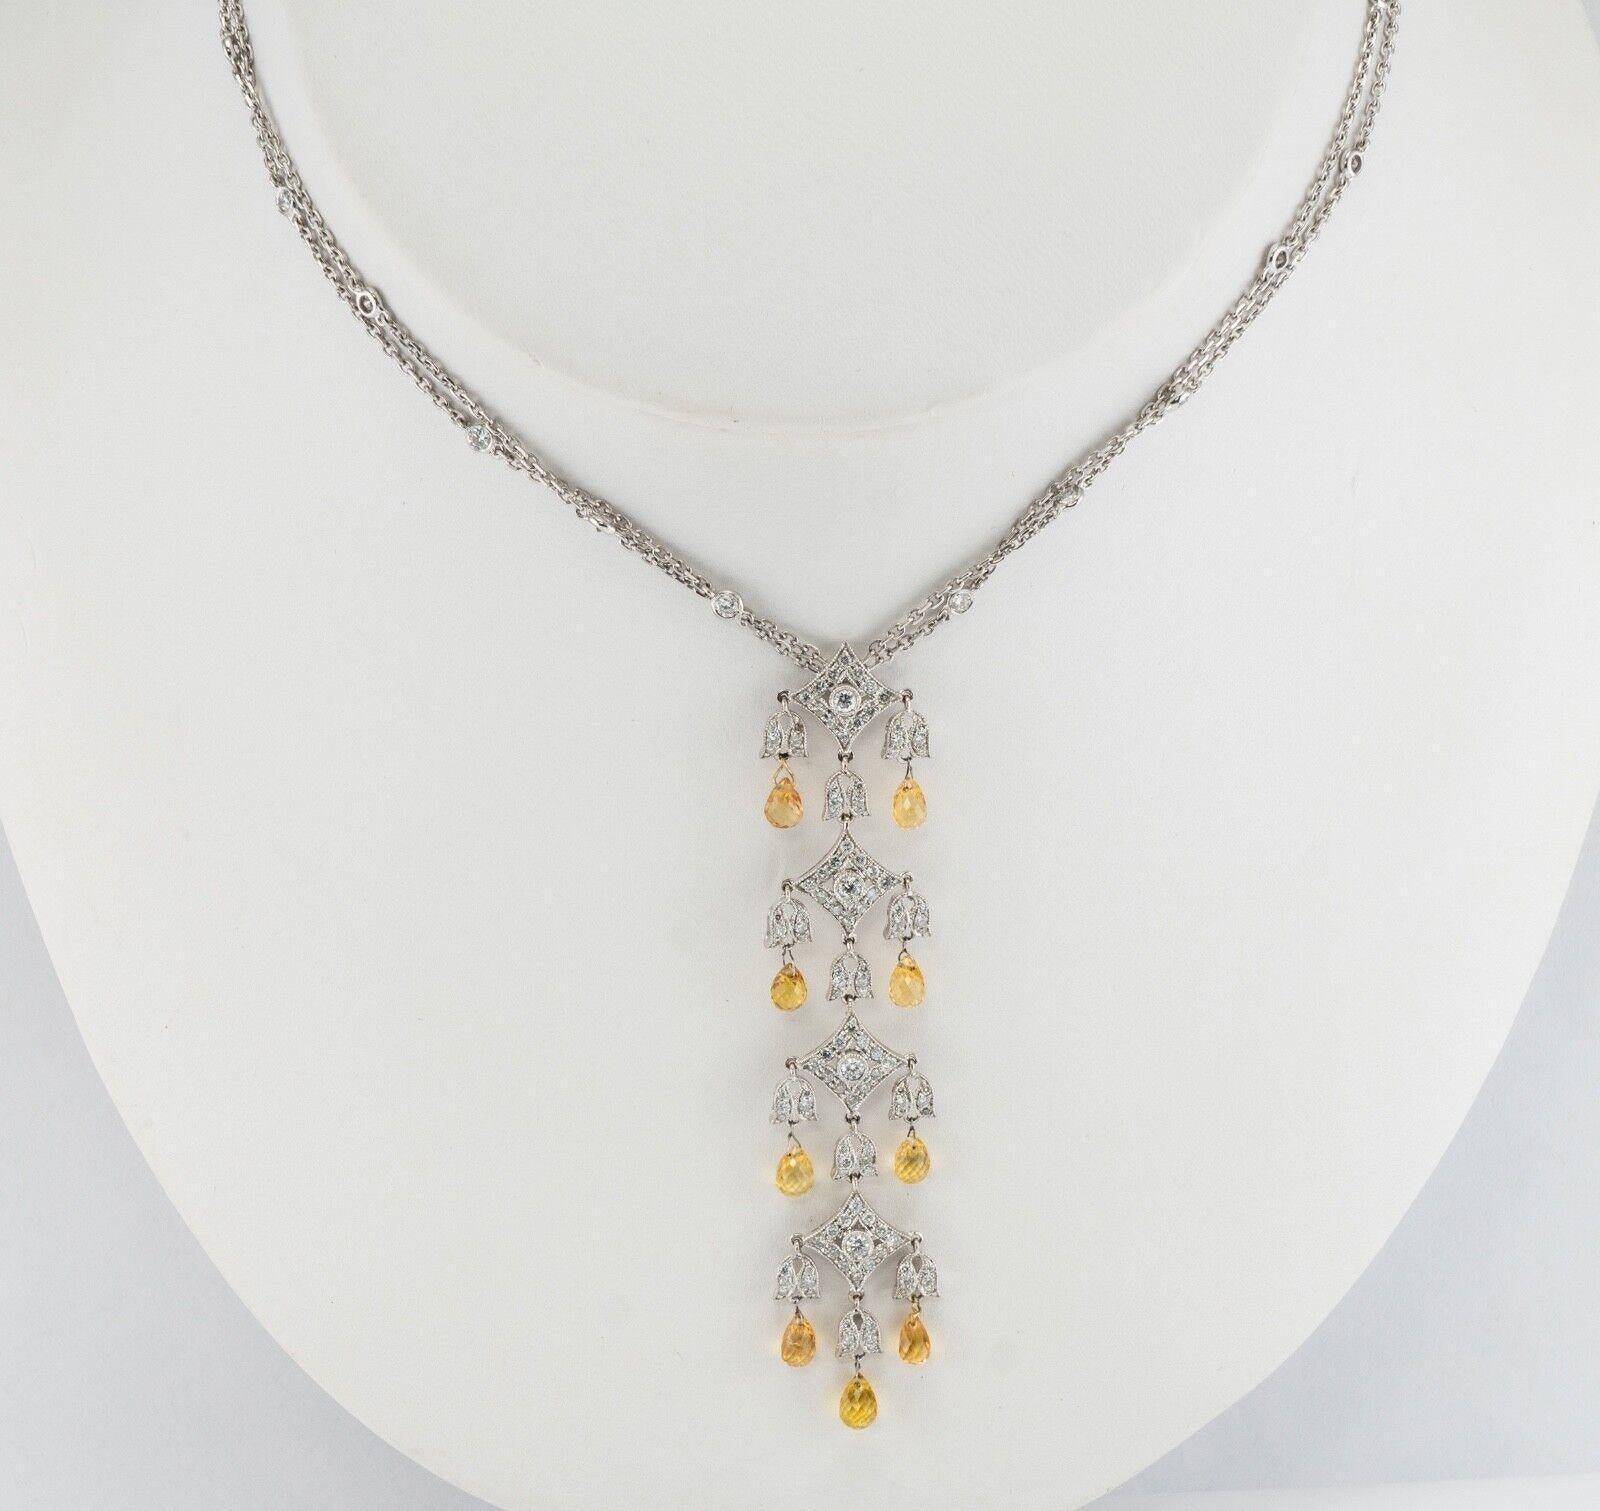 Yellow Sapphire Diamond Necklace Pendant 18K White  Gold 1.85 TDW
This amazing necklace is finely crafted in solid 18K White gold. The center piece is studded with 124 white and fiery diamonds and nine Yellow Sapphire briolettes measuring 5mm. 48